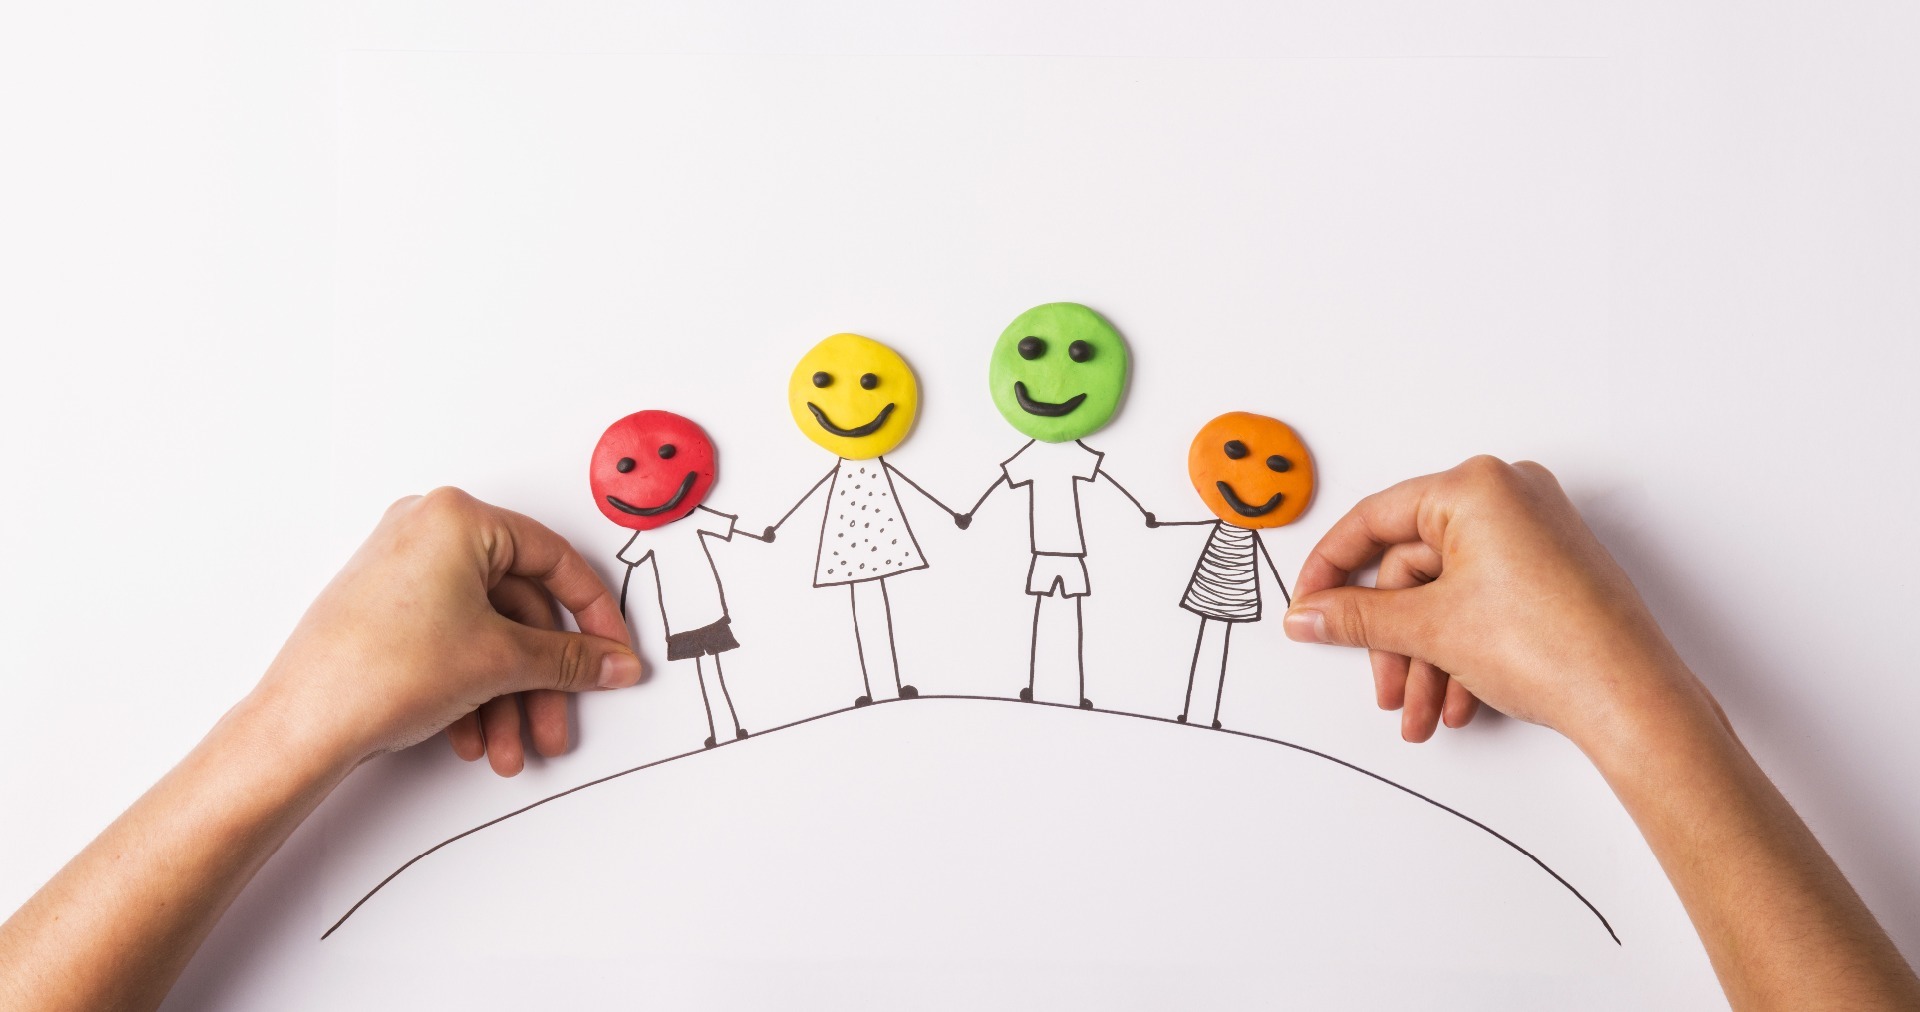 A family drawn in black pen, with play-doh faces in different colours, holding hands.